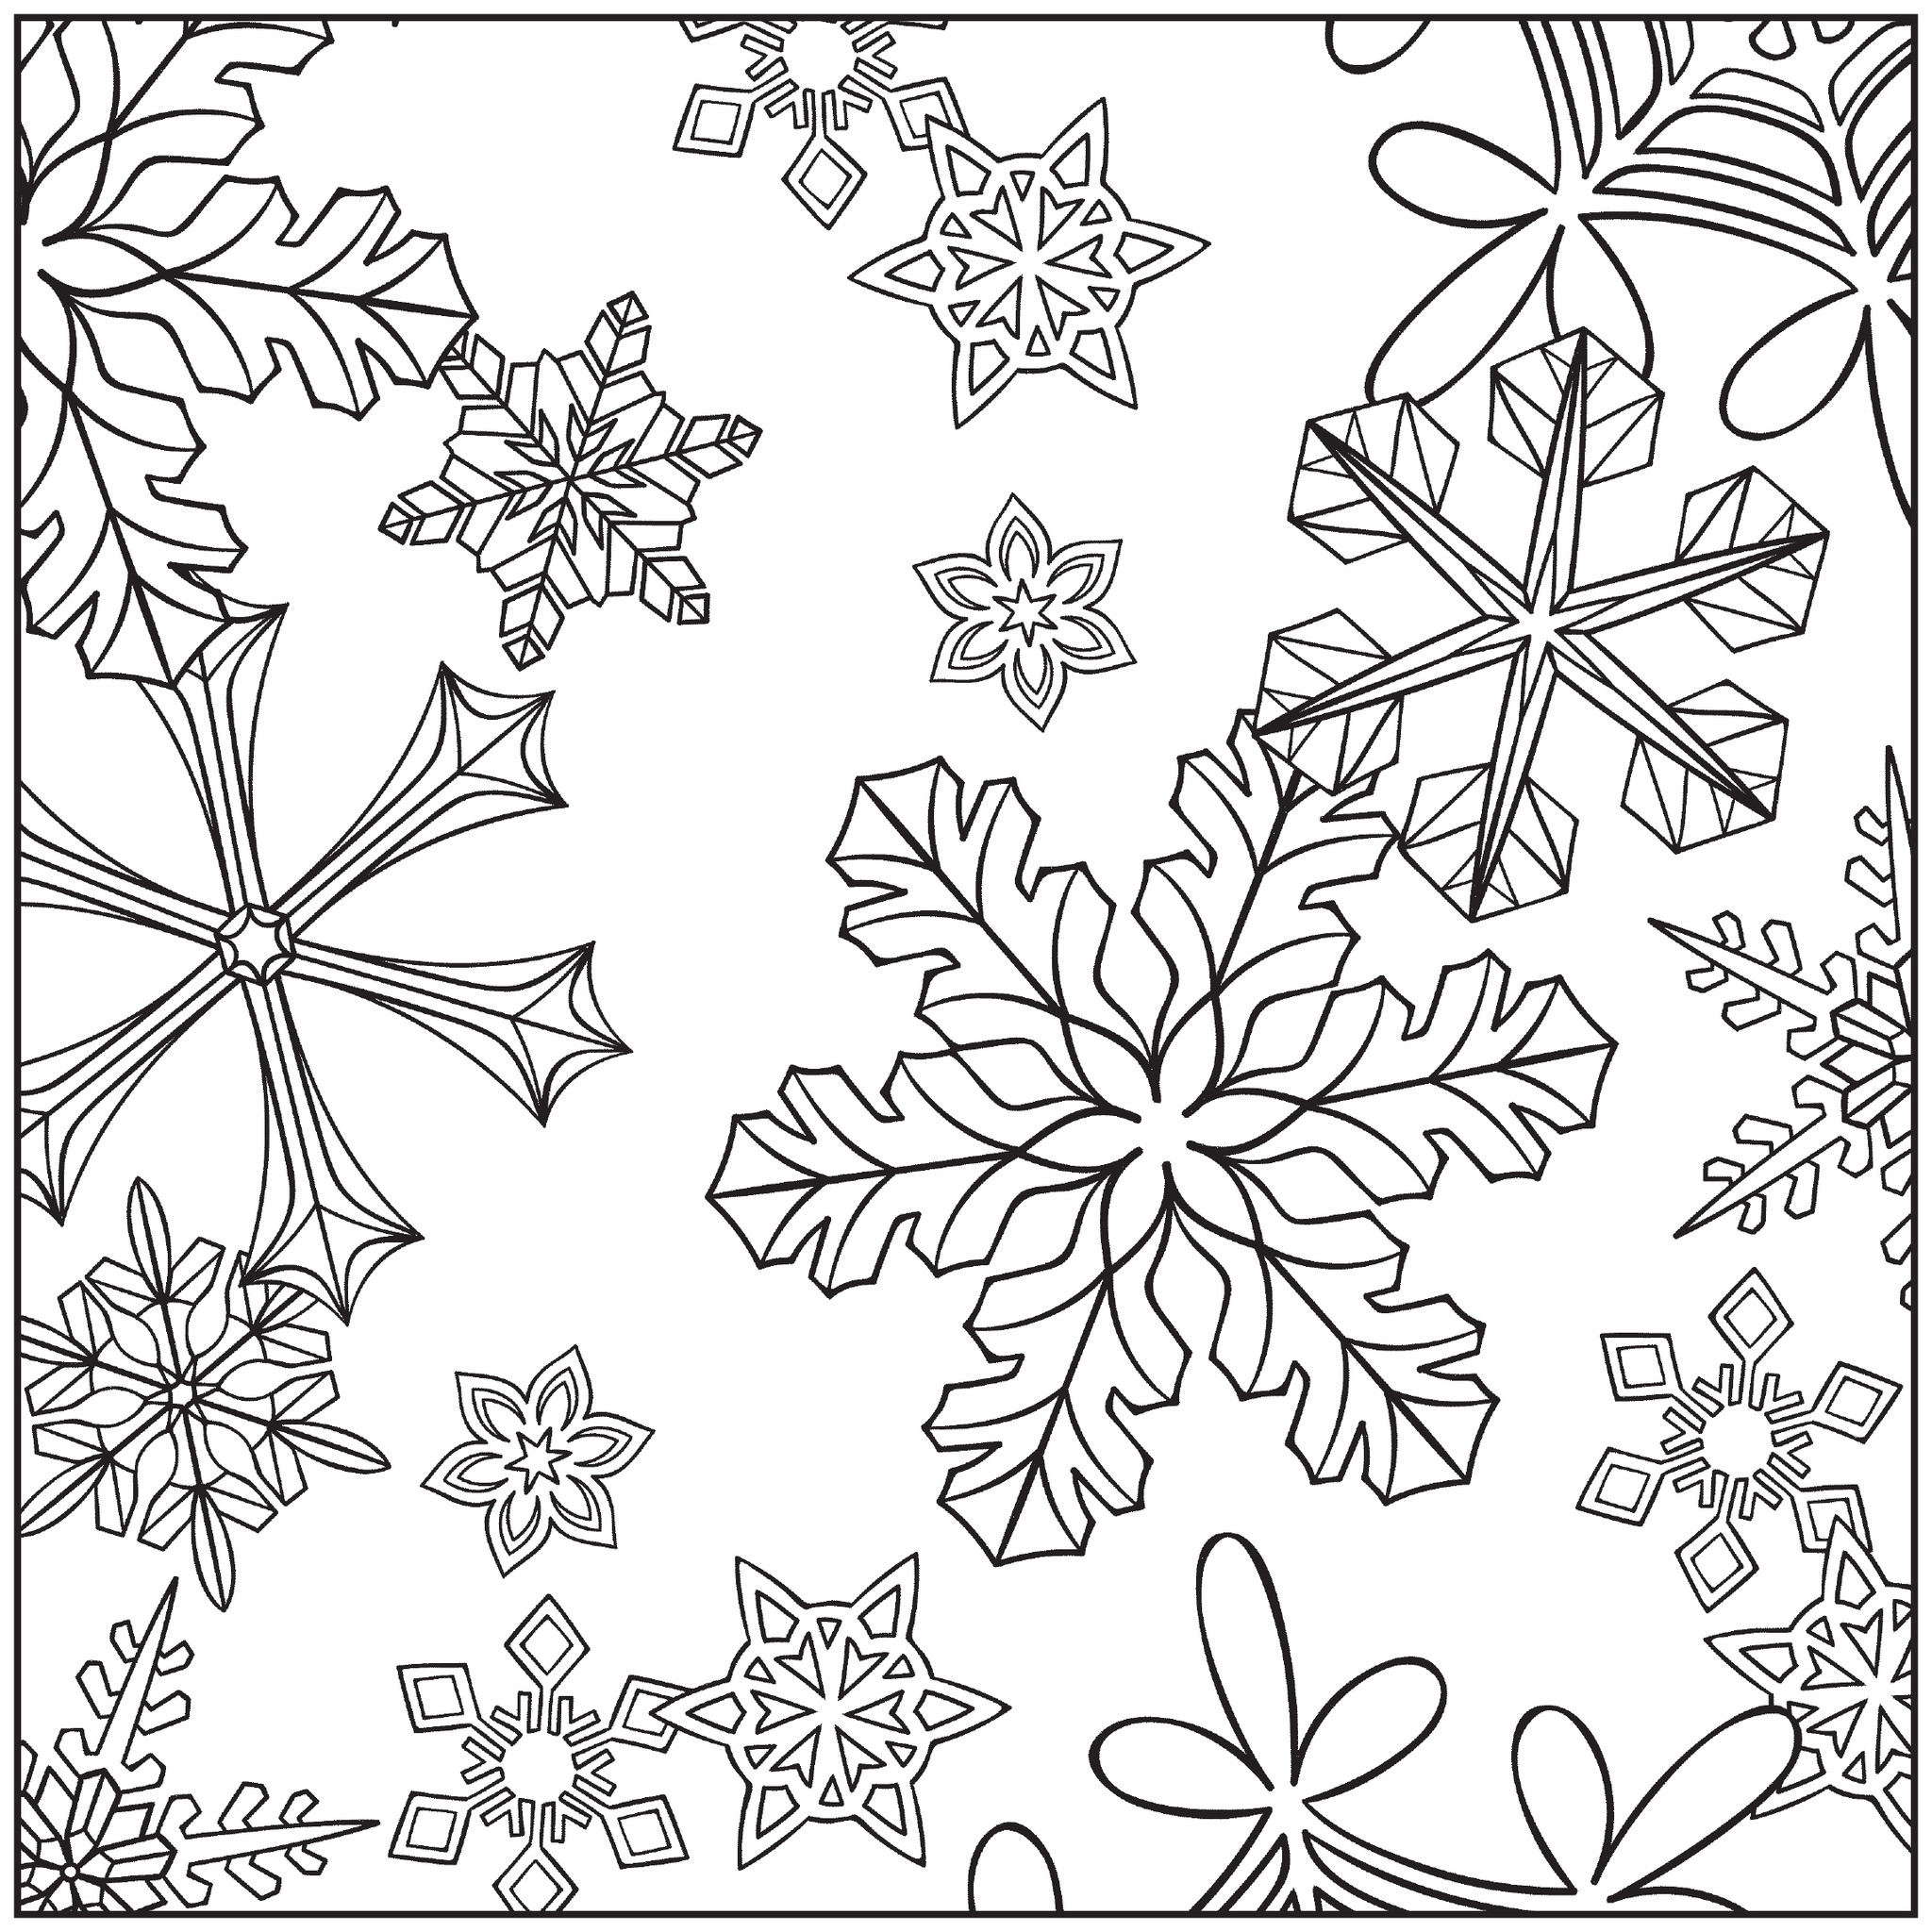 Printable Winter Wonderland Coloring Pages - Printable World Holiday